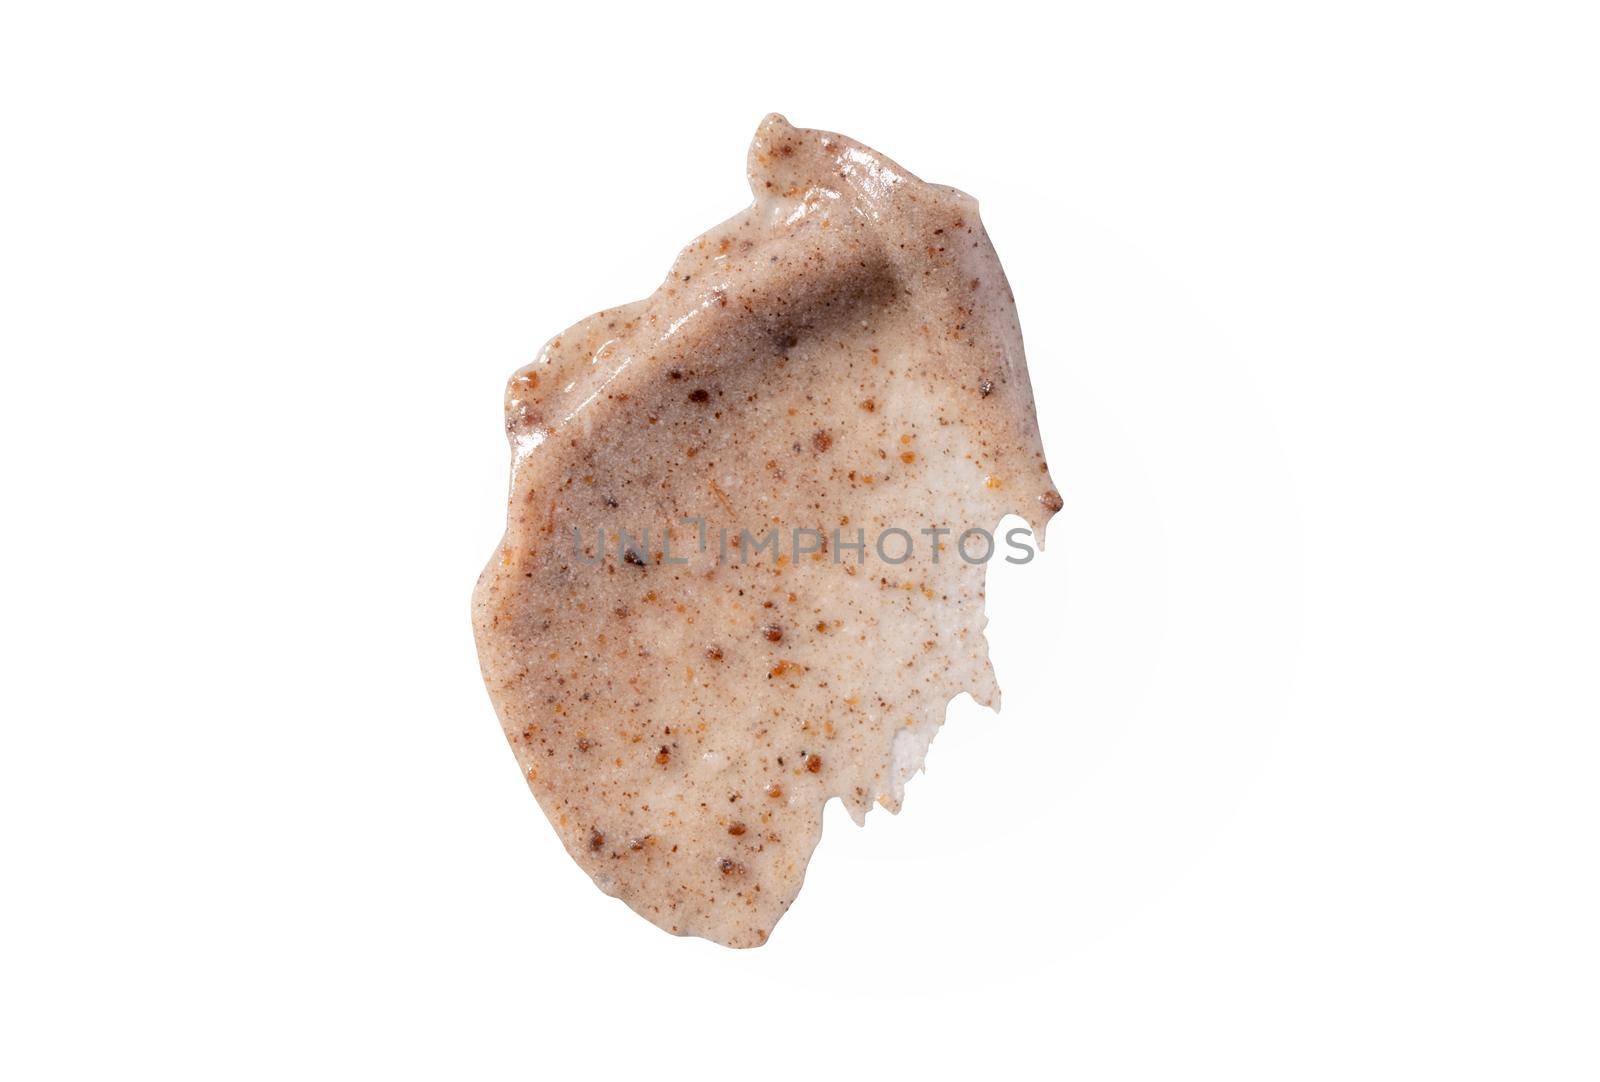 Scrub smear swatch isolated on white background. Peeling cream smudge with exfoliating particles, cosmetic skincare product with abrasive particle sample, gentle nude scrub texture by photolime